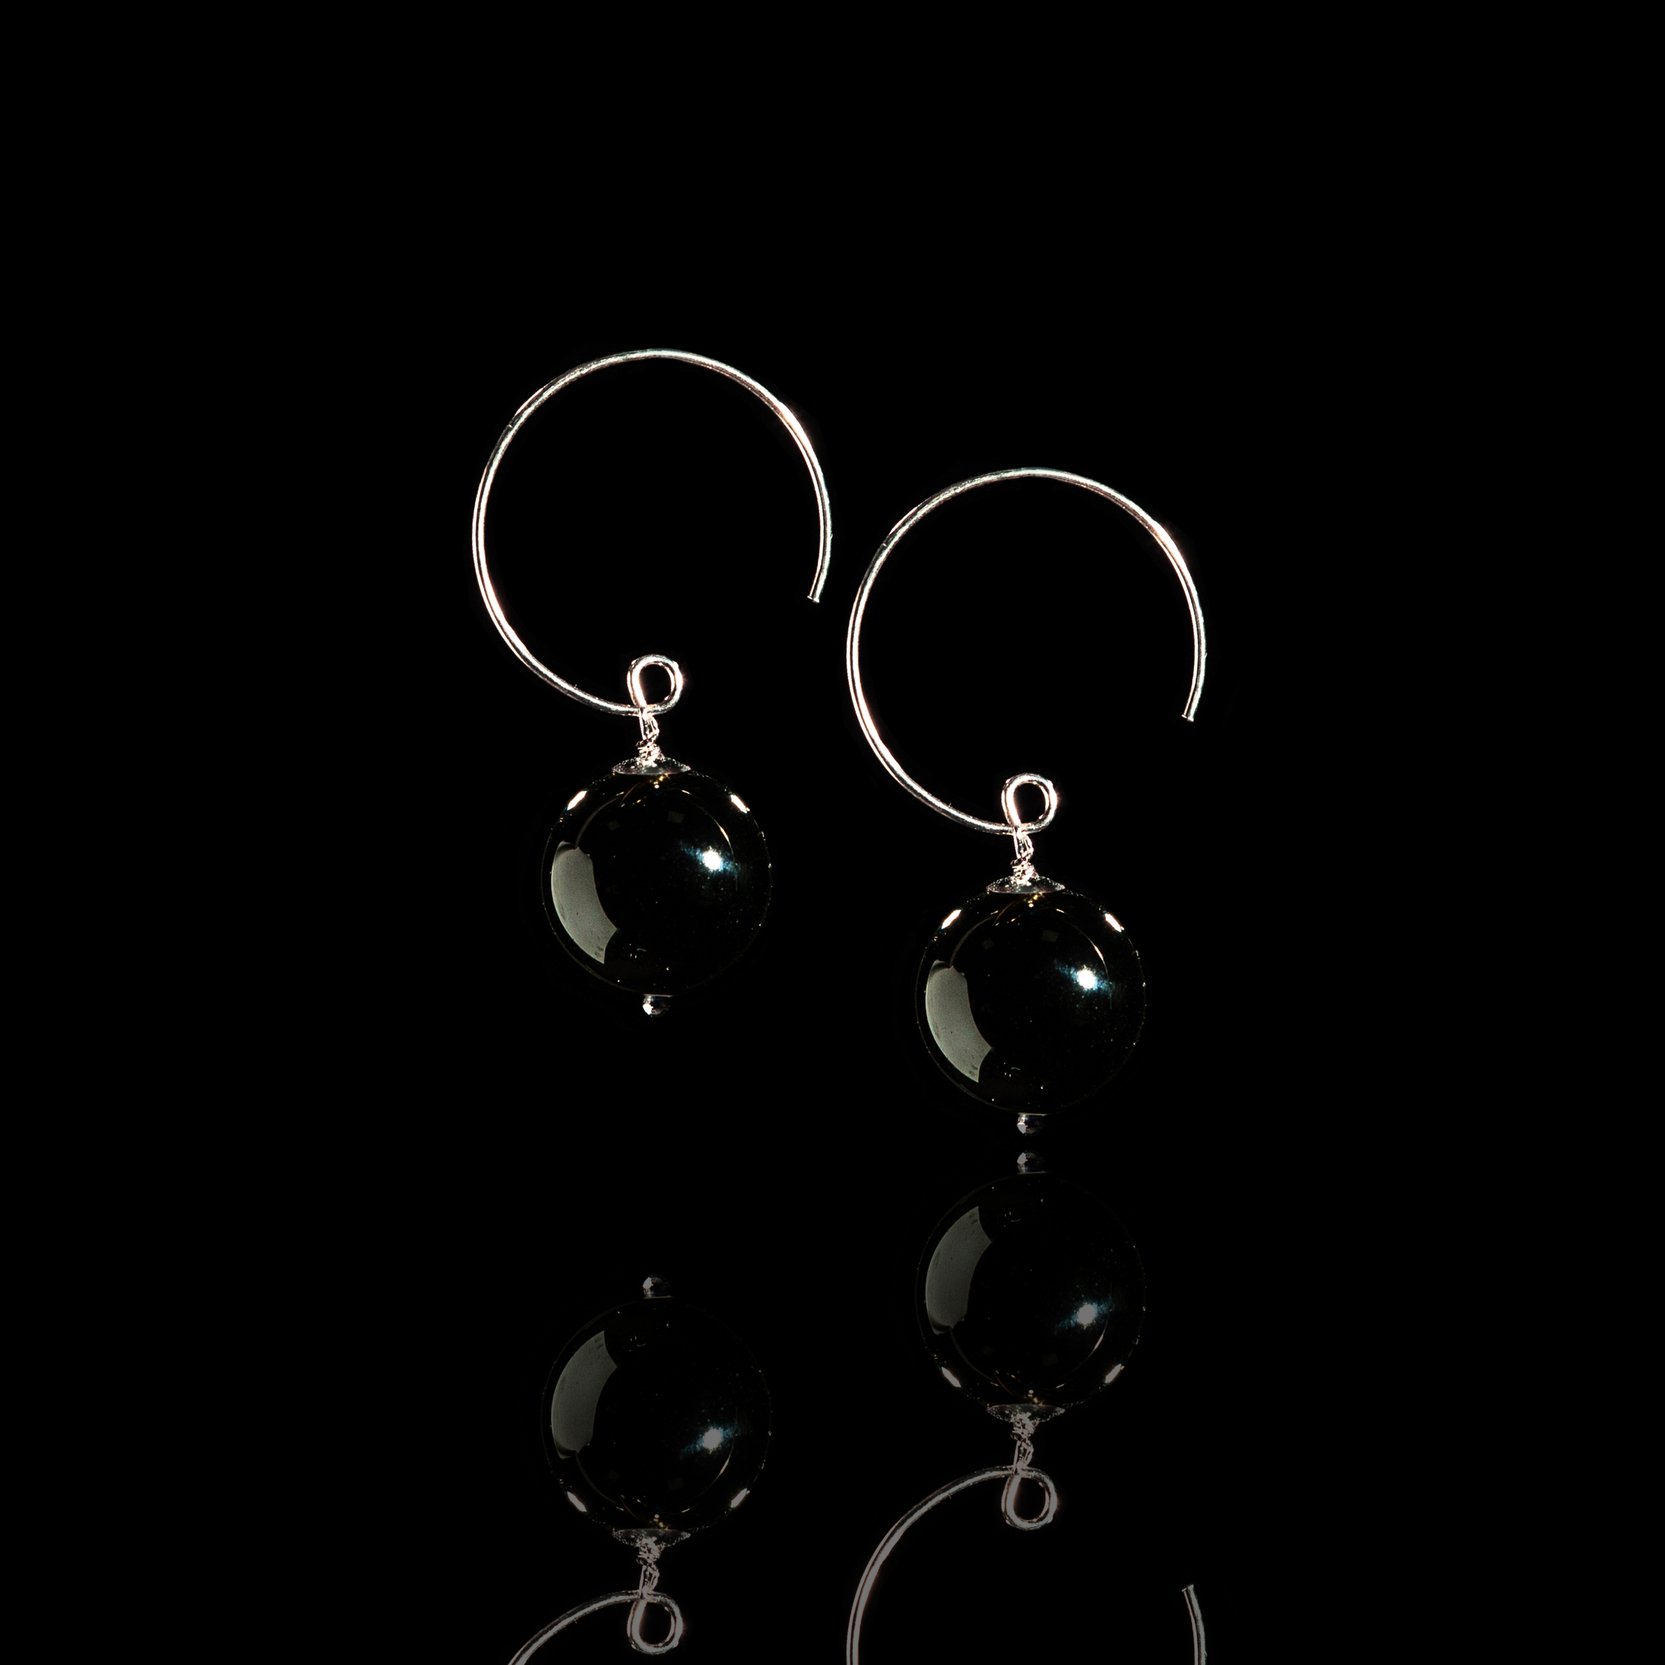 Silver earrings with black agates